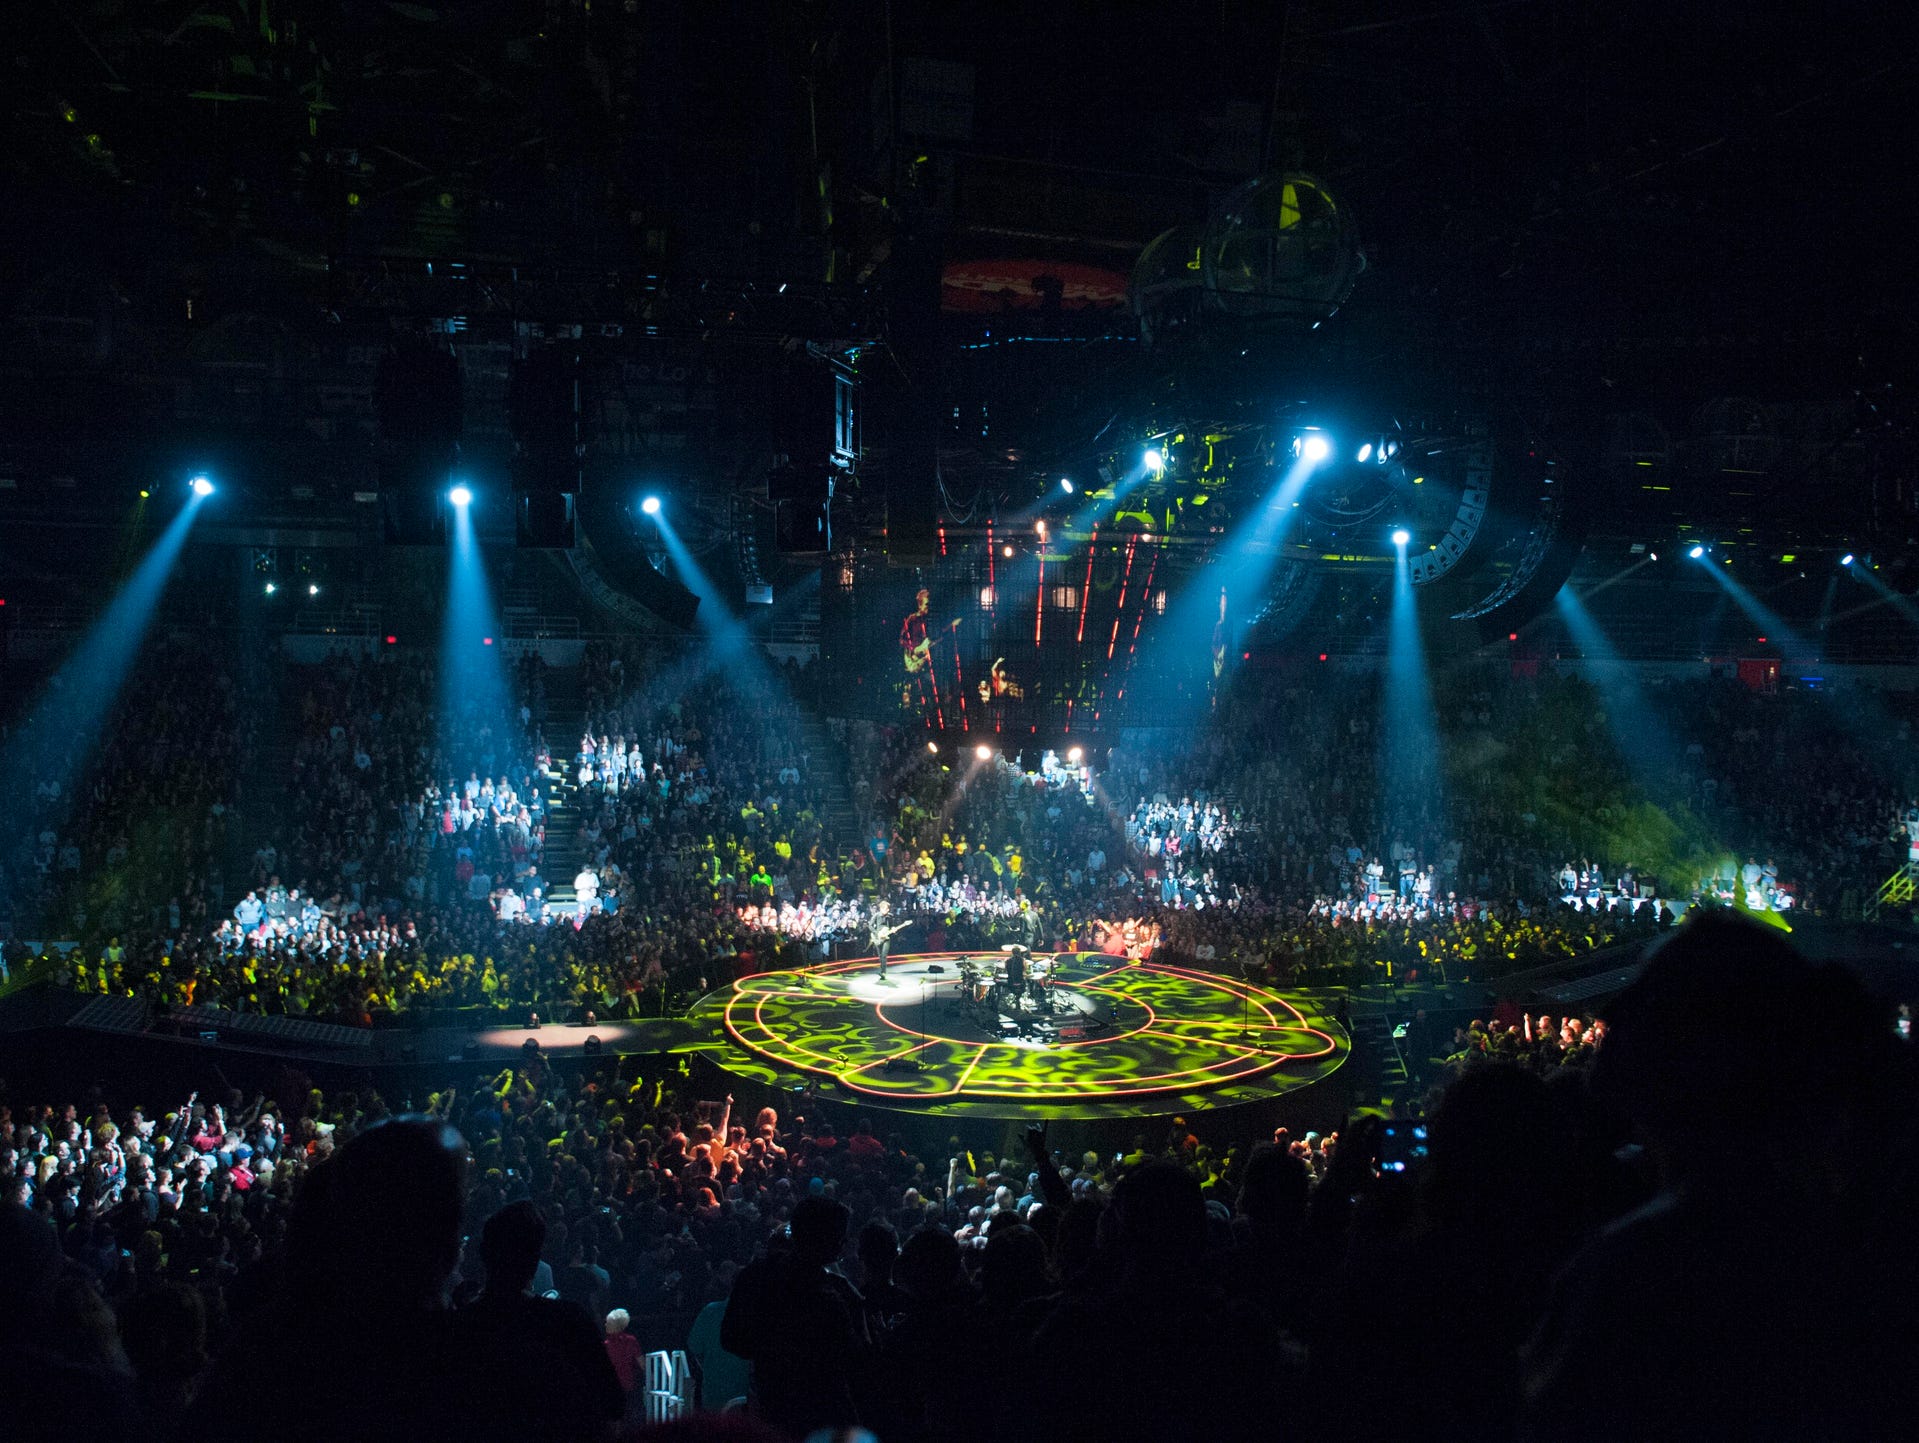 Muse performs on a circular stage in the middle of